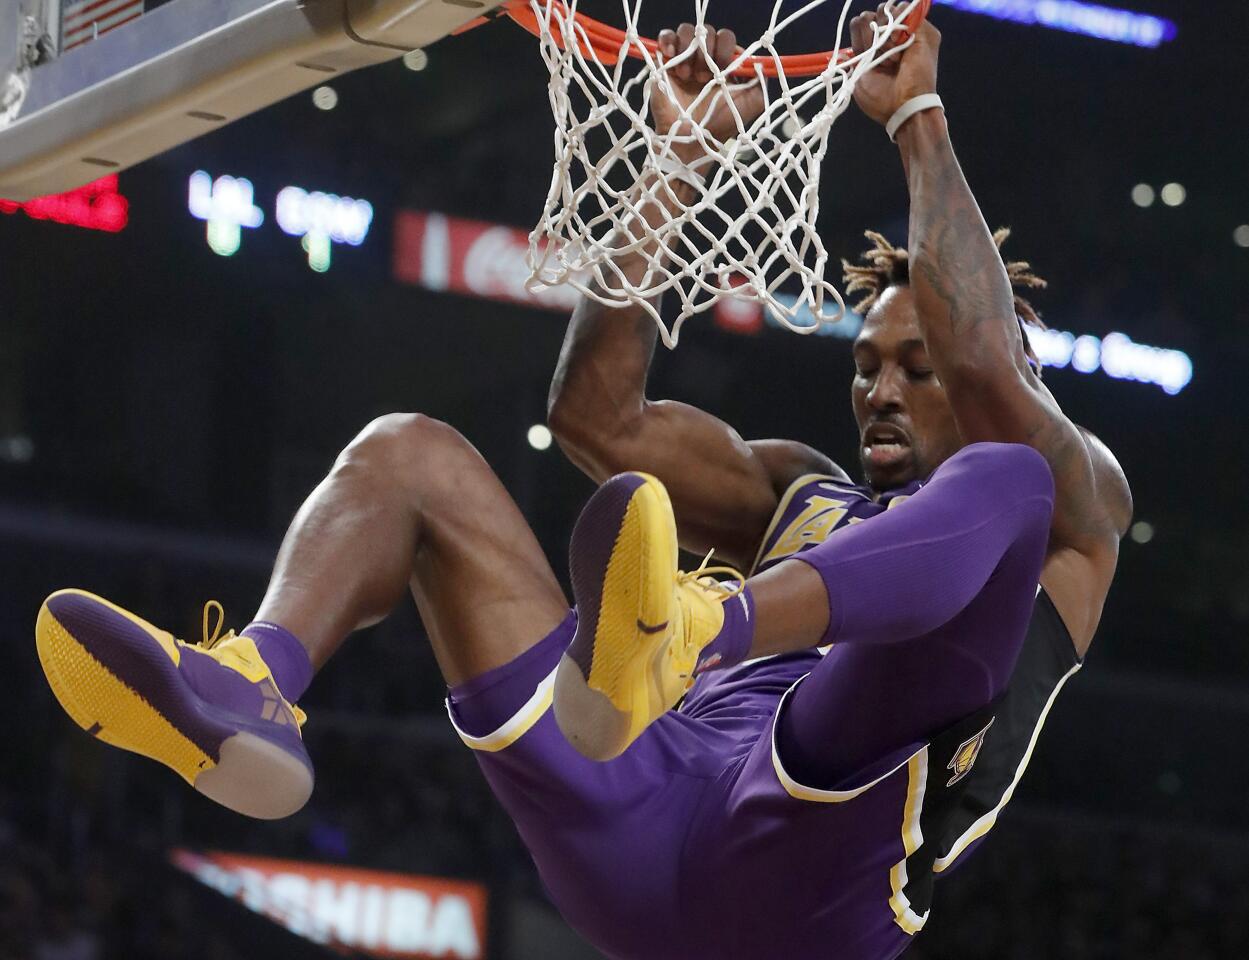 Lakers center Dwight Howard hangs on the rim after a slam dunk against the Warriors in the second quarter.